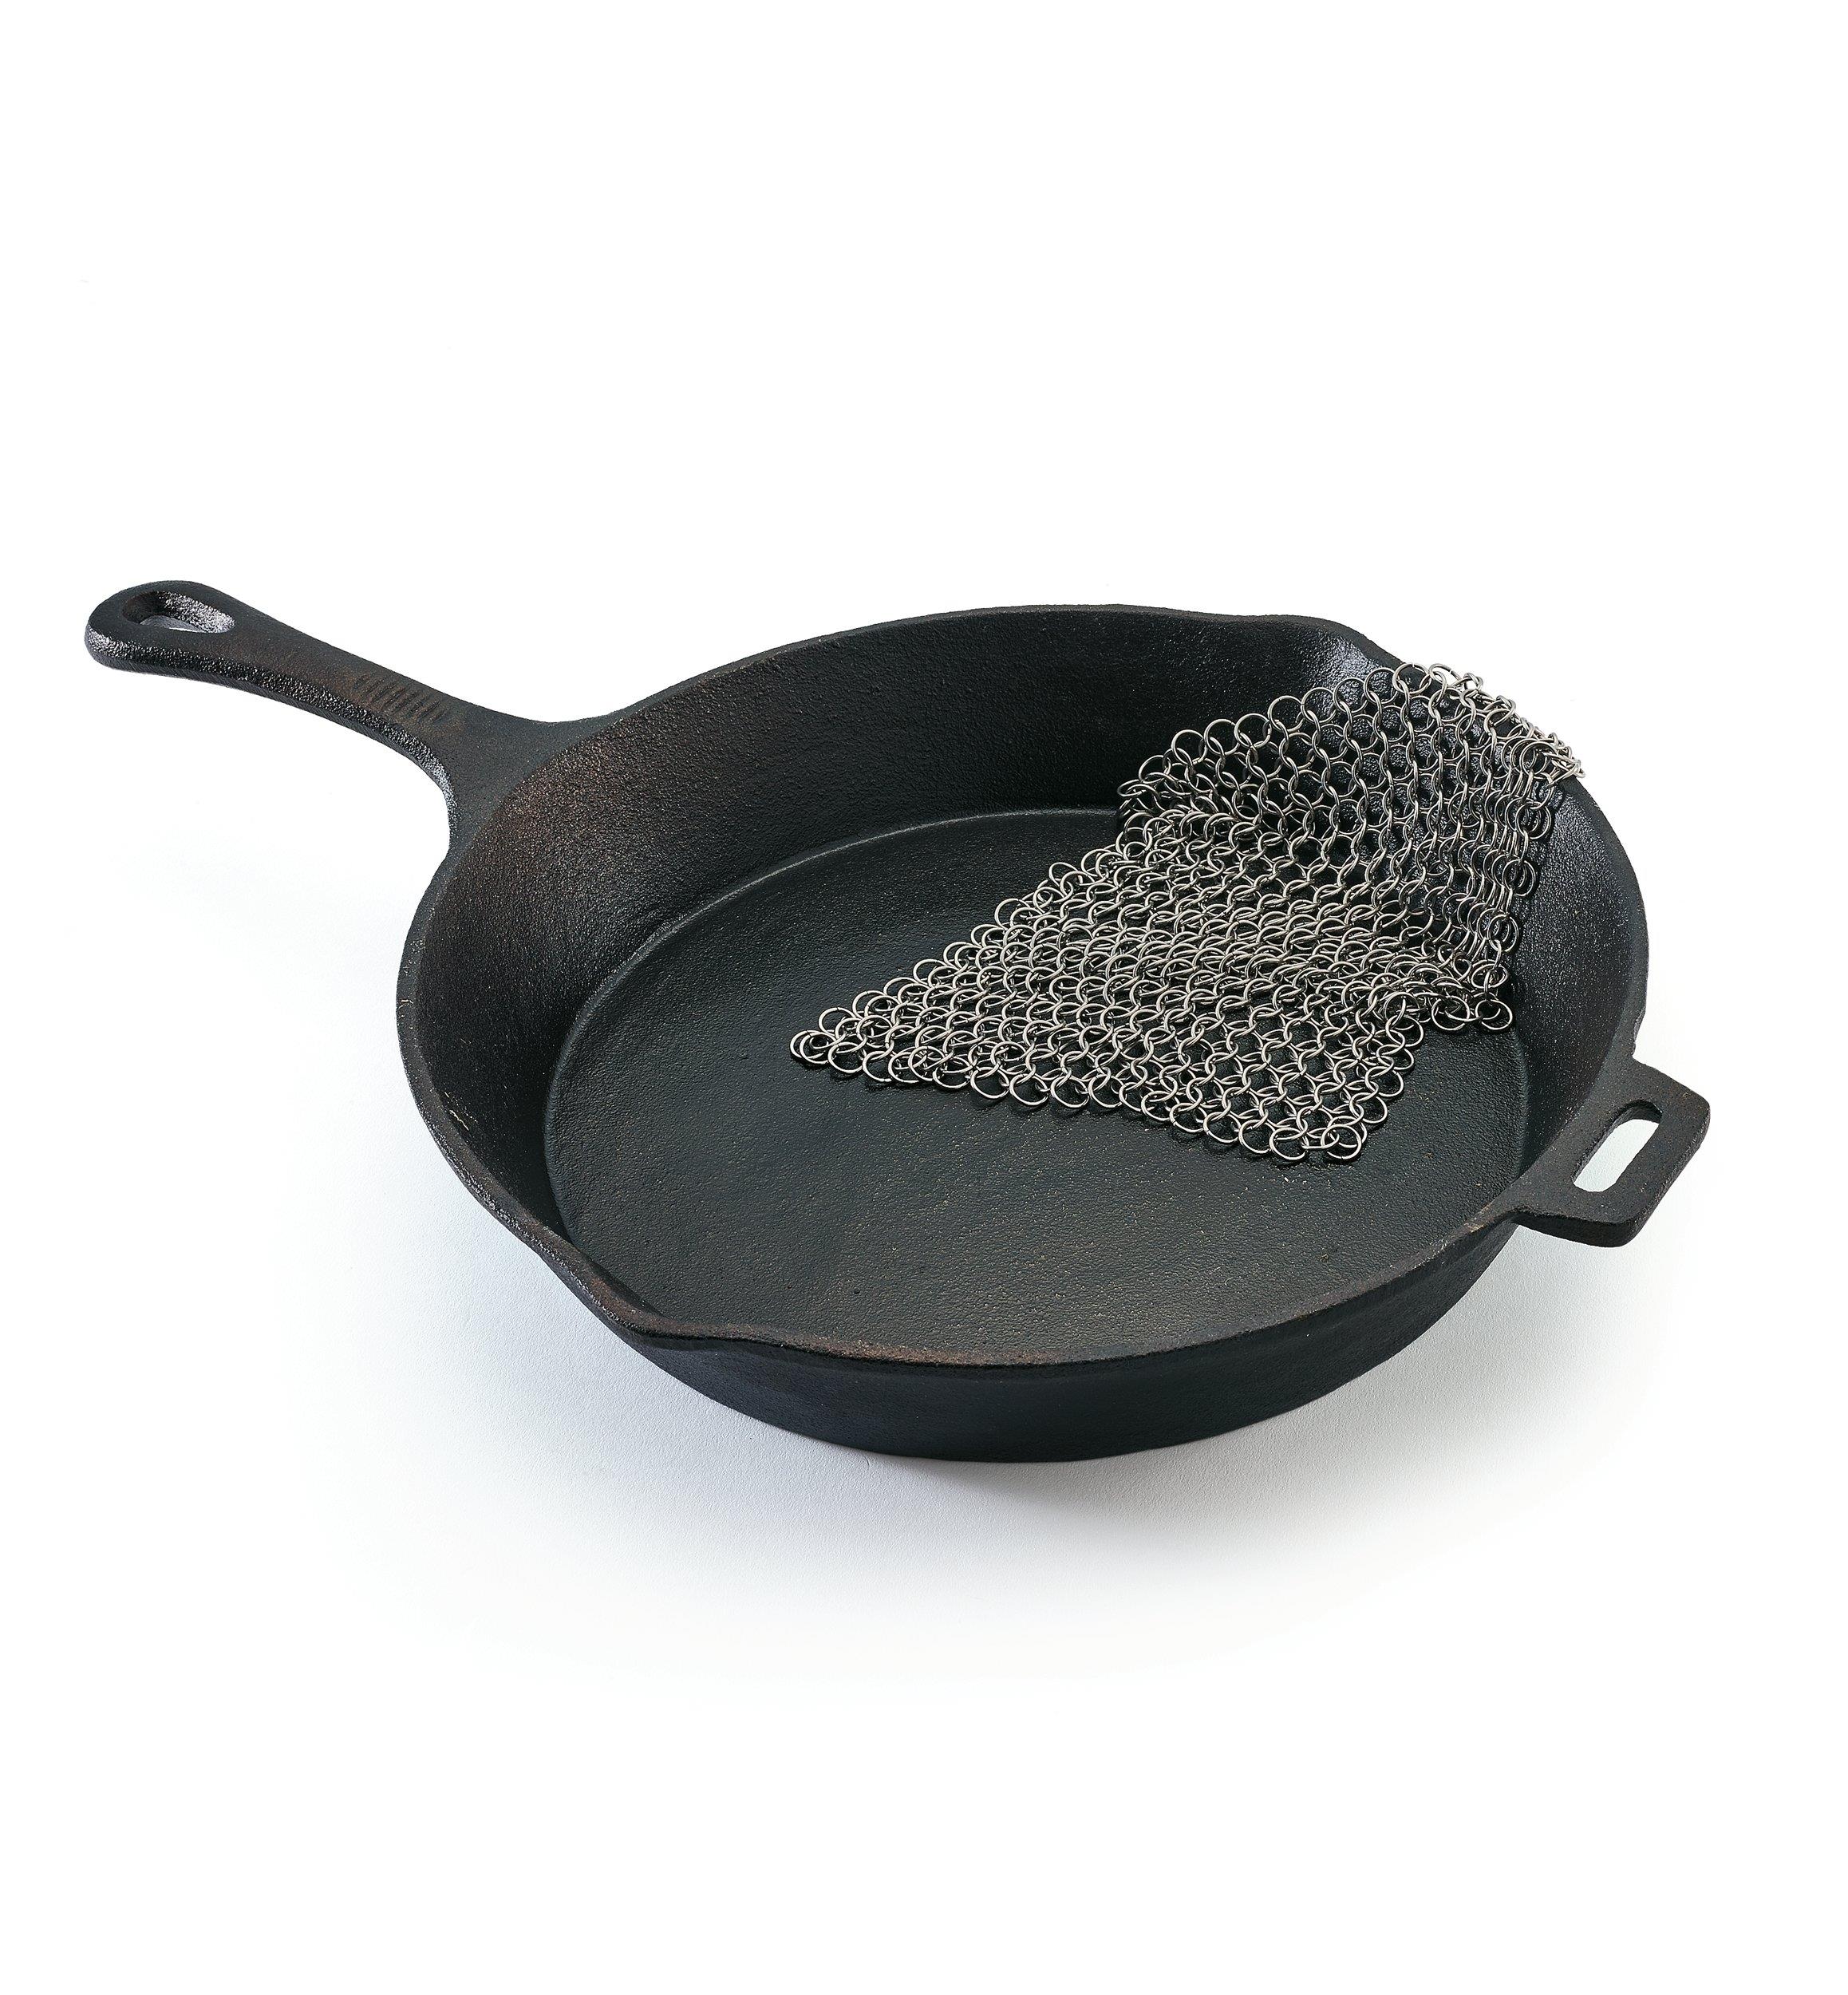 https://assets.leevalley.com/Size5/10064/DB309-stainless-steel-chain-mail-scrubber-a-02-r.jpg